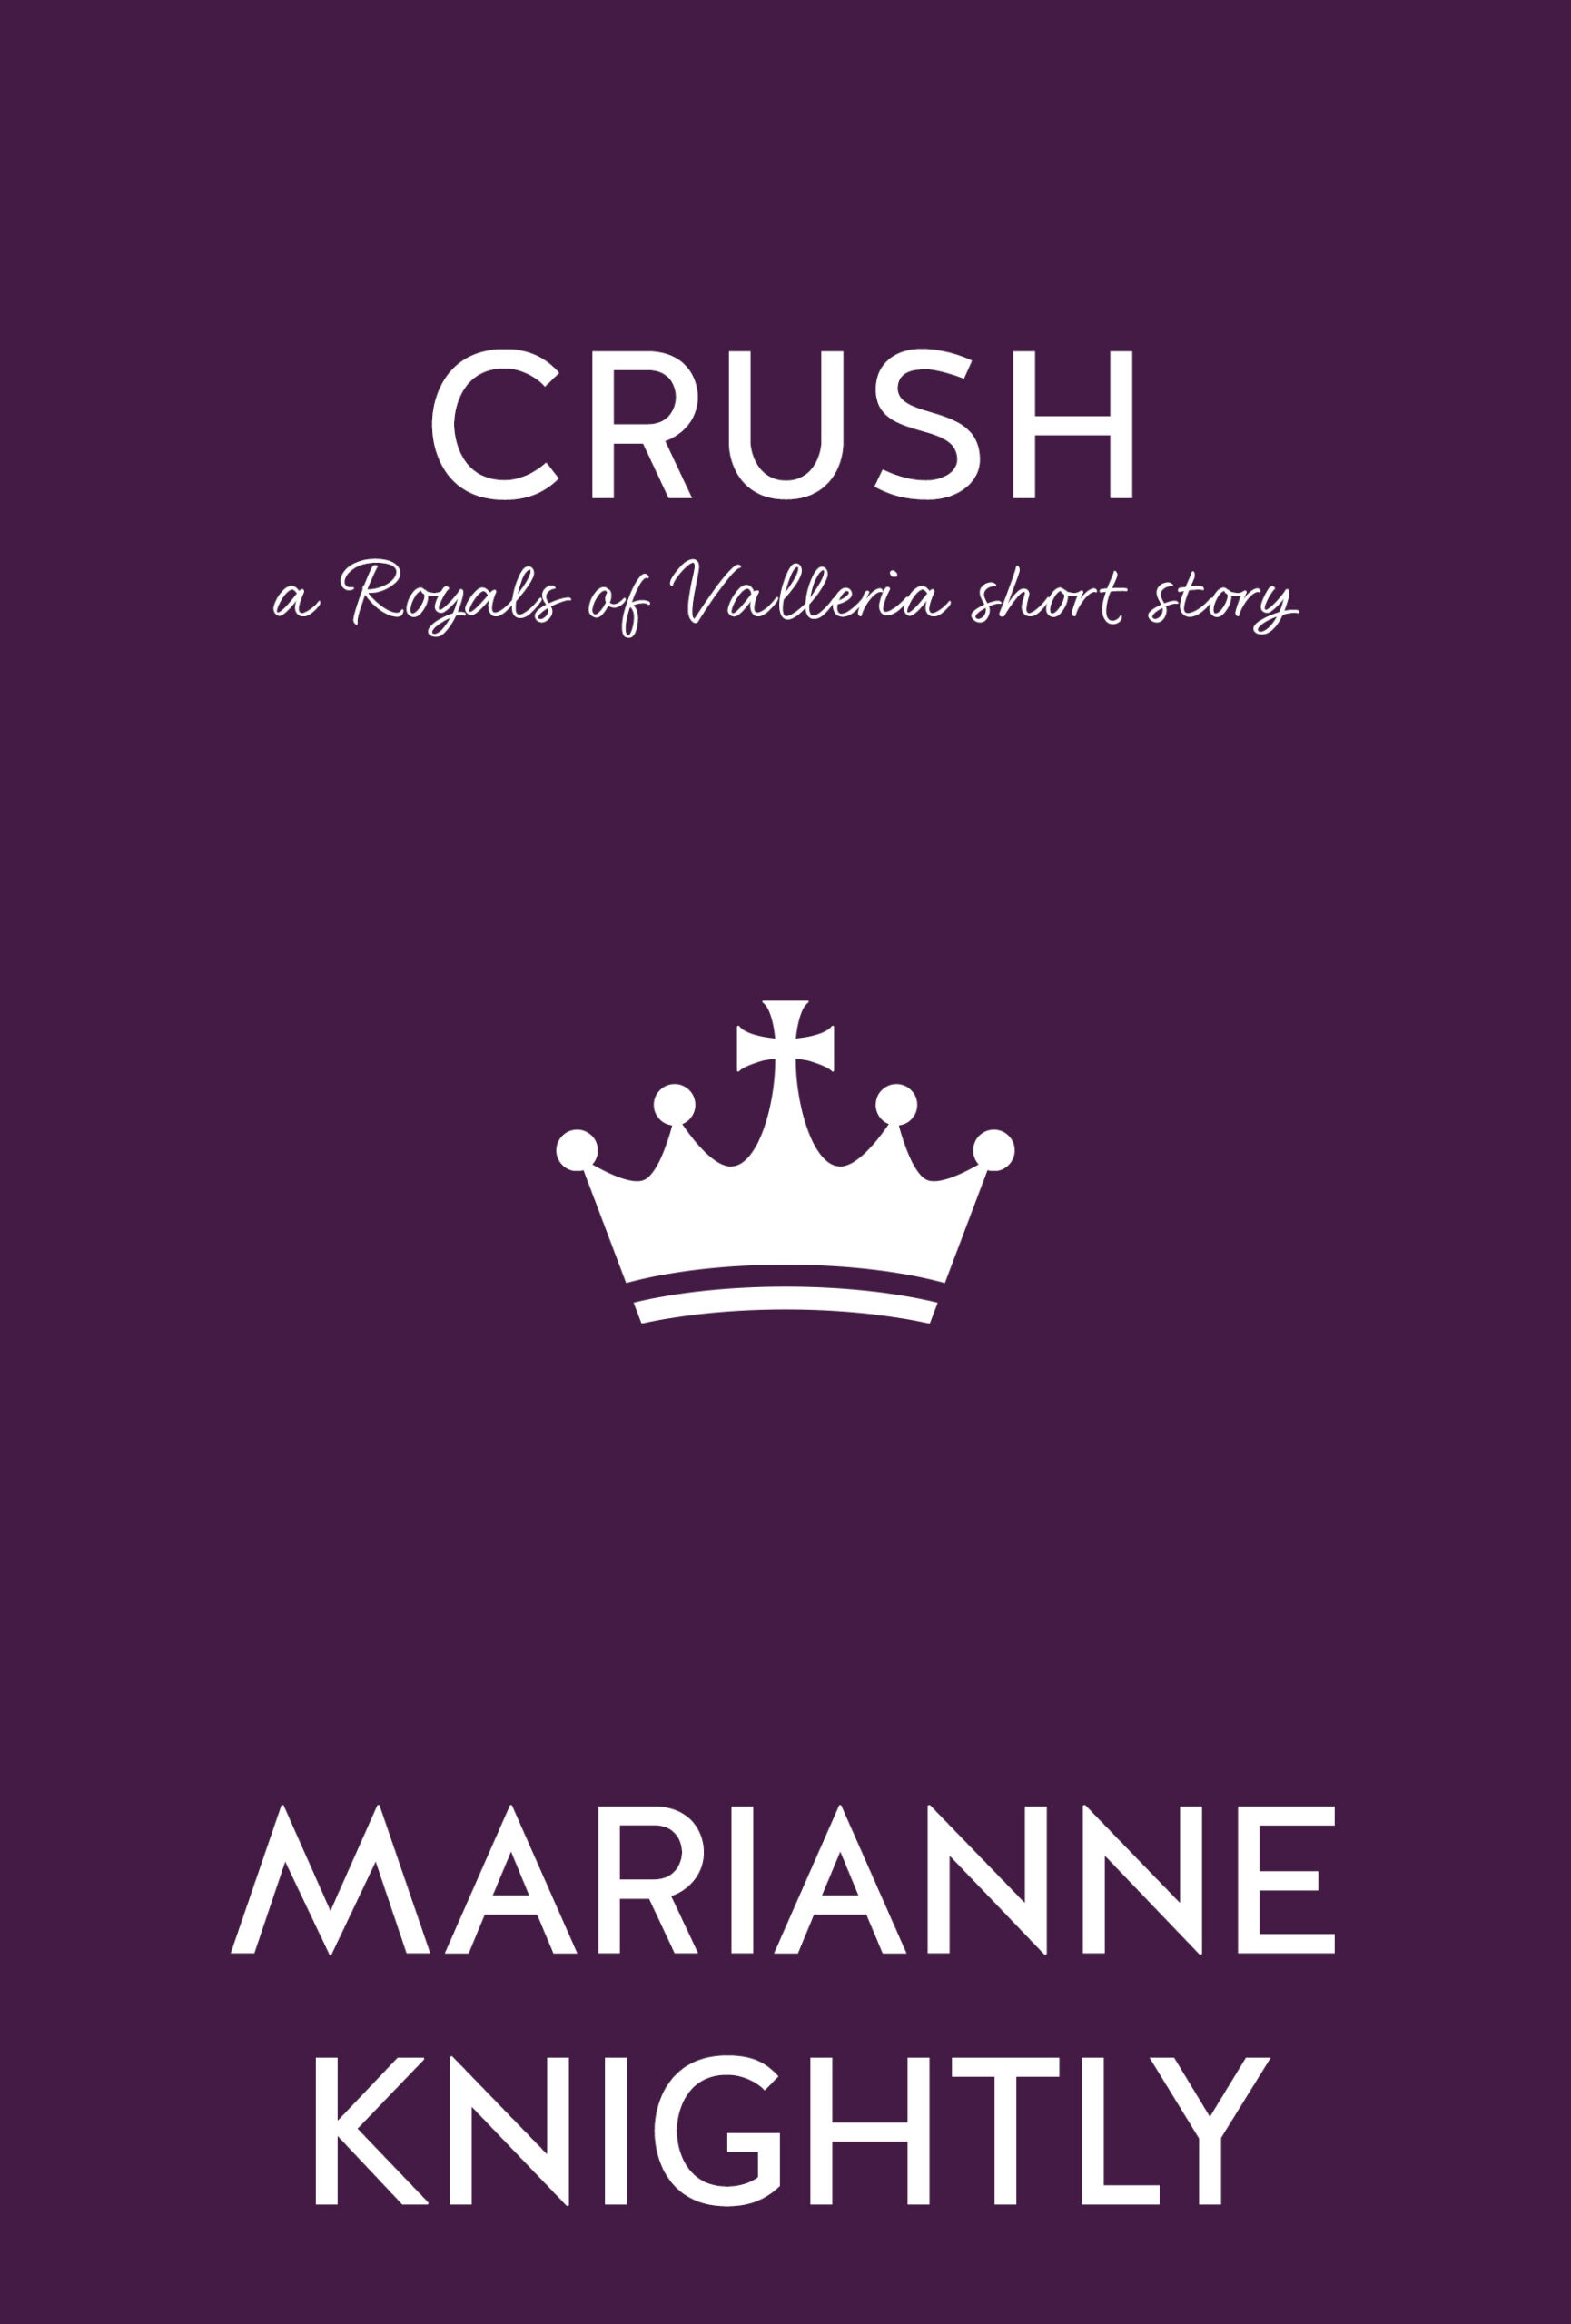 Crush - A Royals Short Story by Marianne Knightly